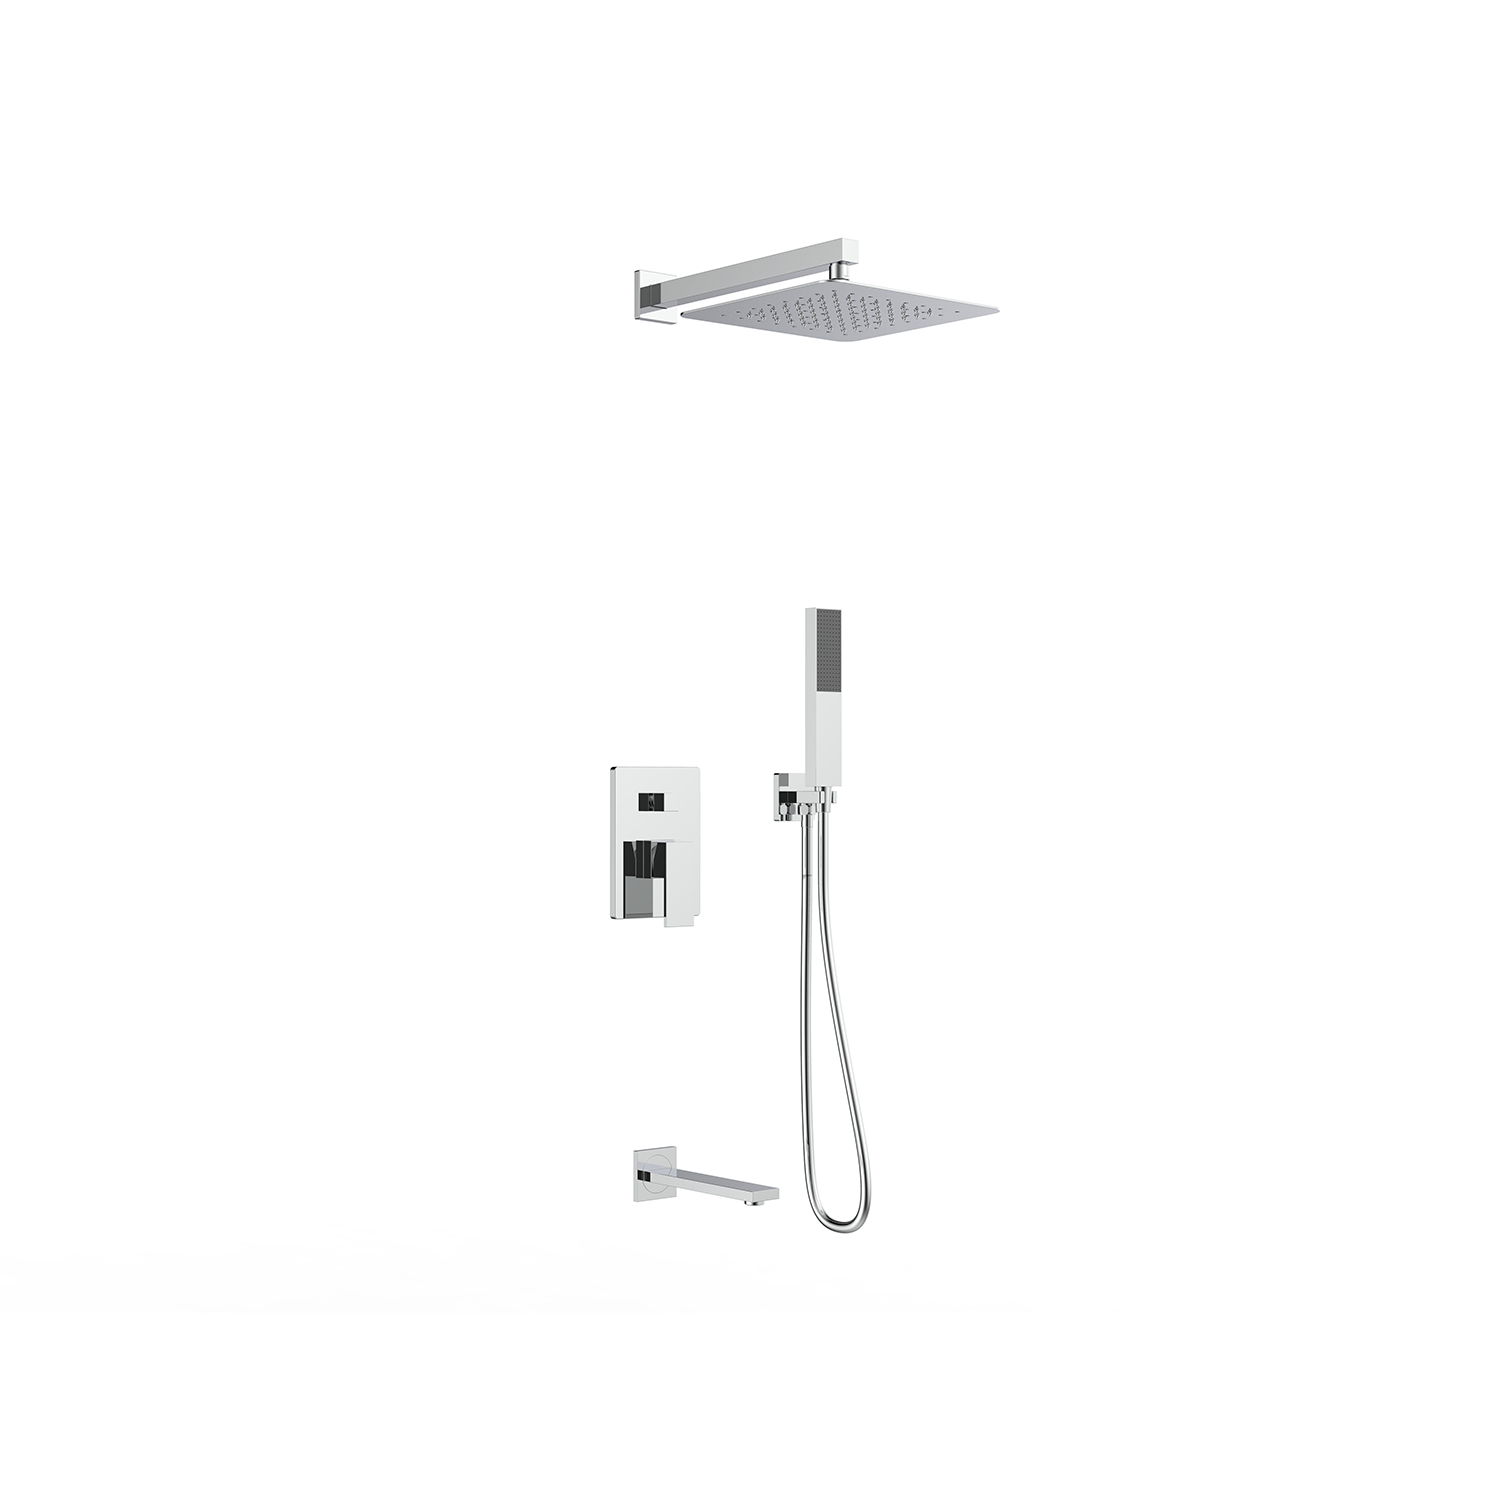 DAX Square 3 Way Shower System with Hand Shower Chrome Finish (DAX-6563A)